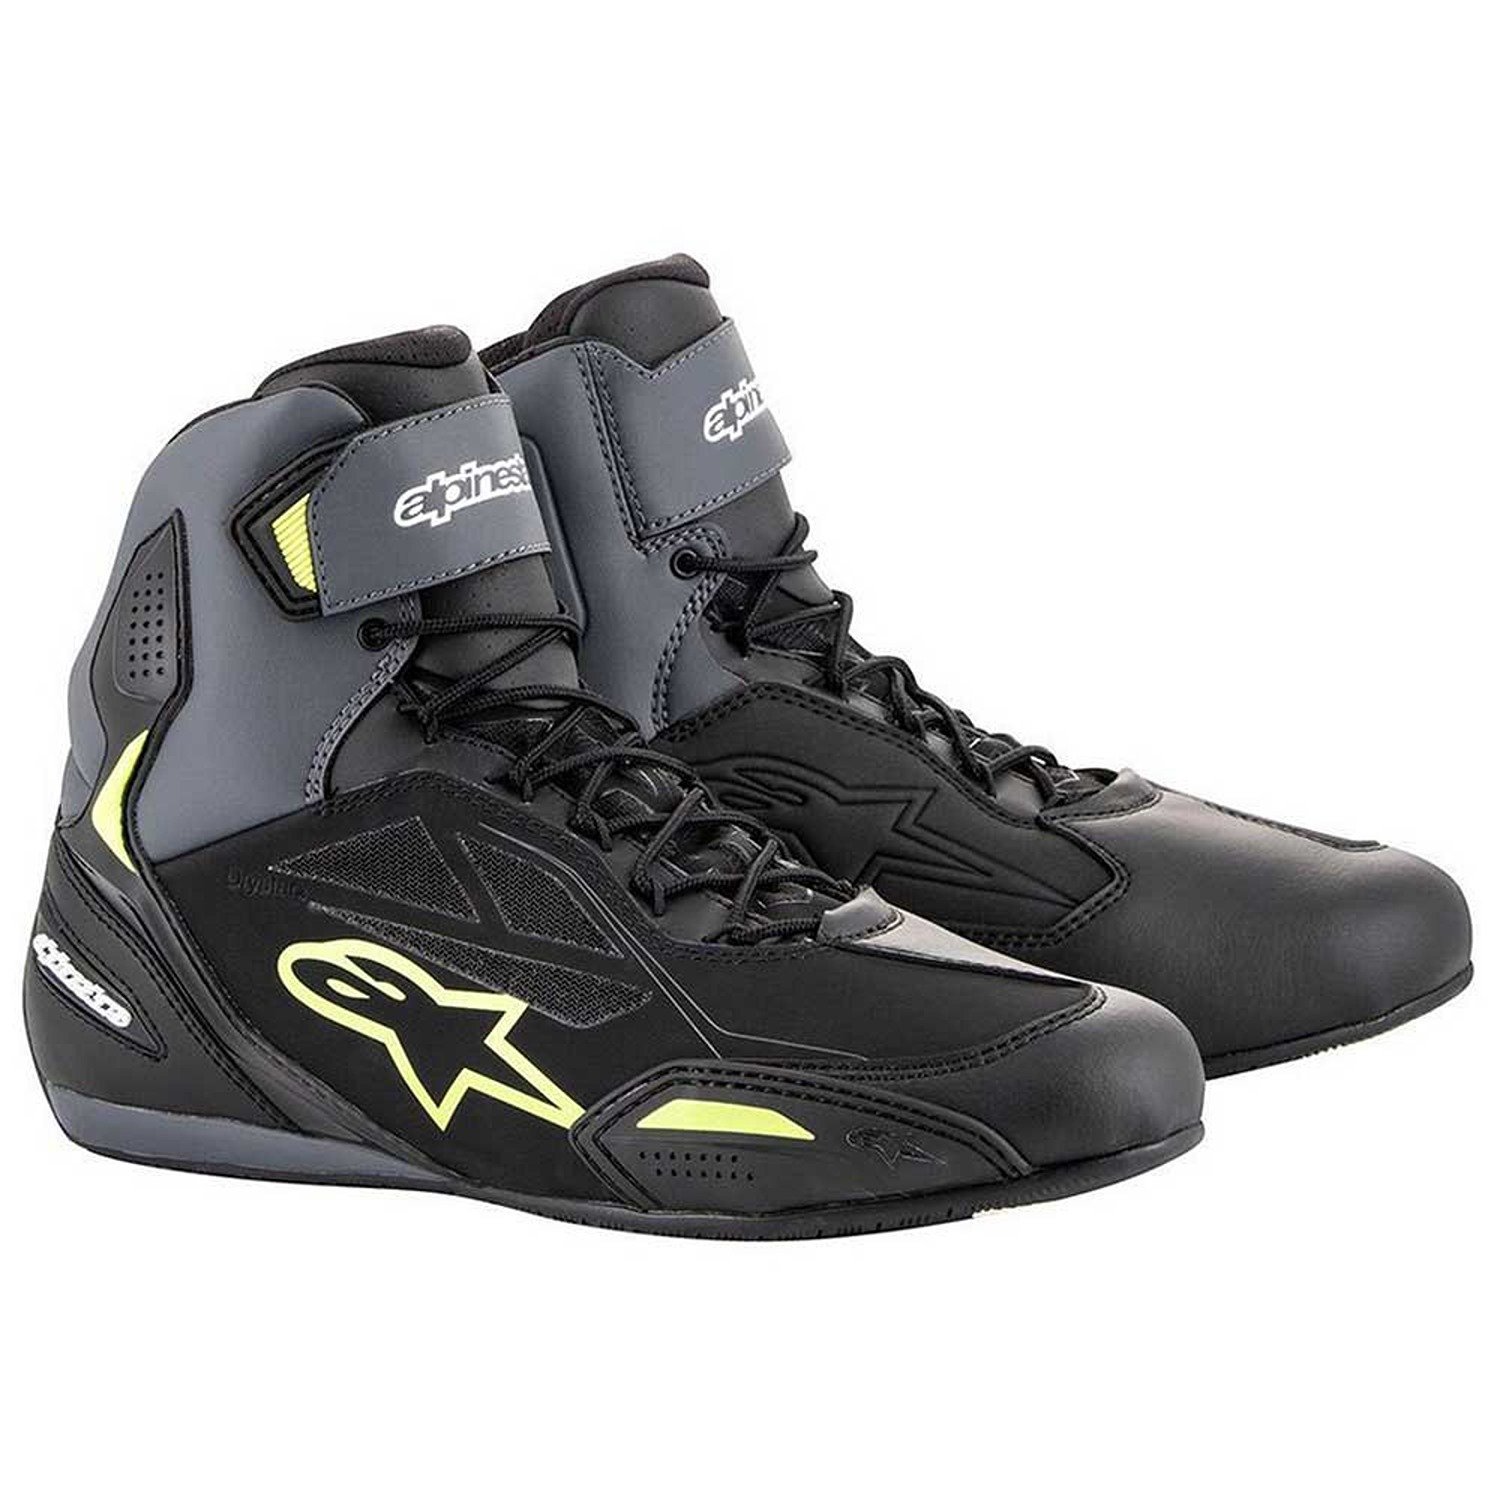 Image of Alpinestars Faster-3 Shoes Black Yellow Fluo Size US 105 EN